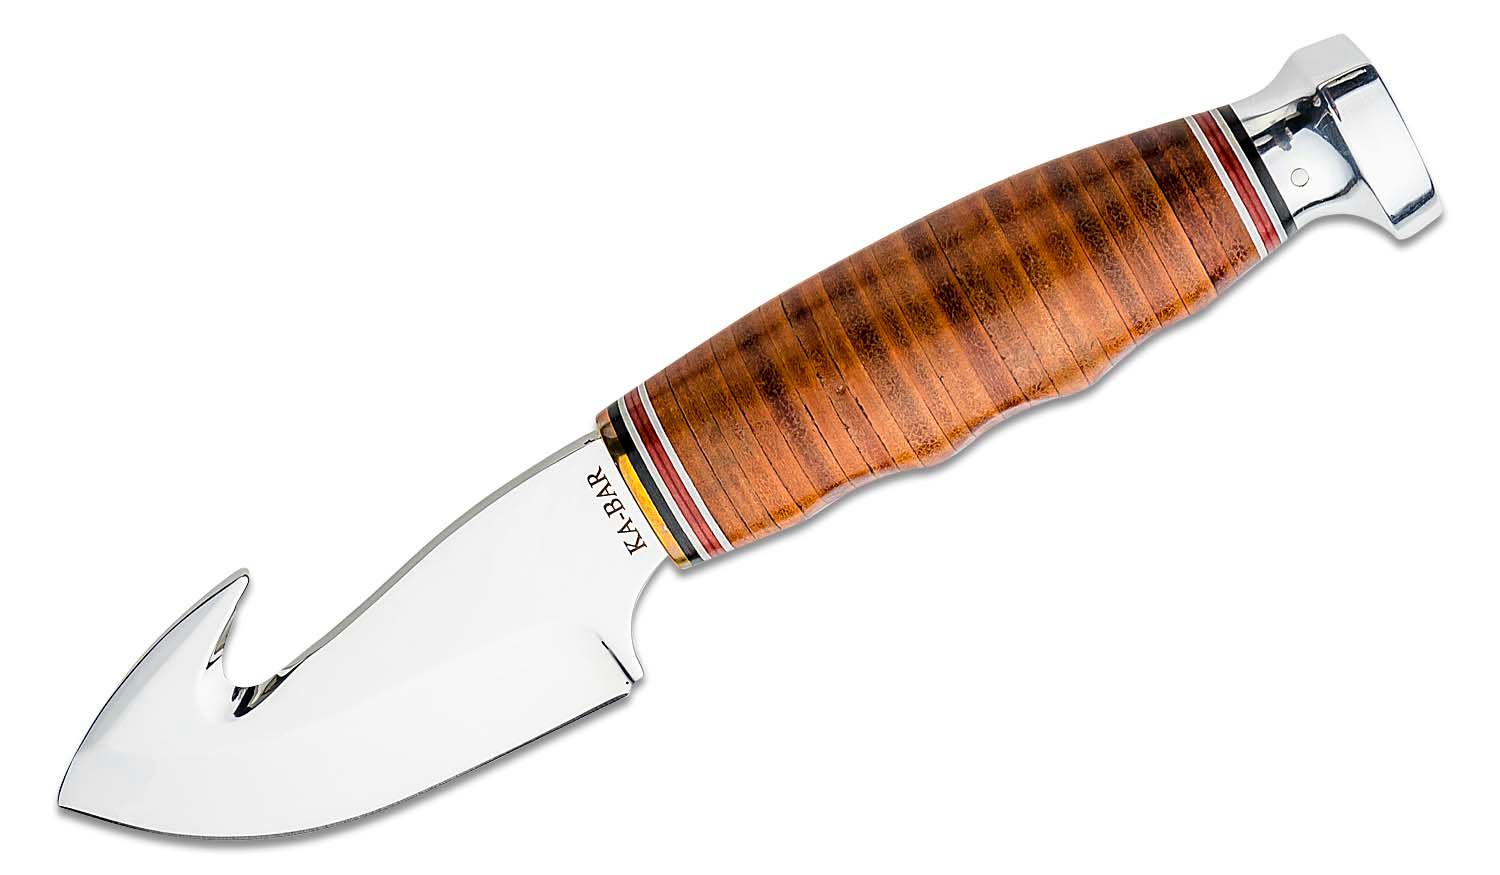 Gut Hook Hunting Knife – the-crowded-kitchen